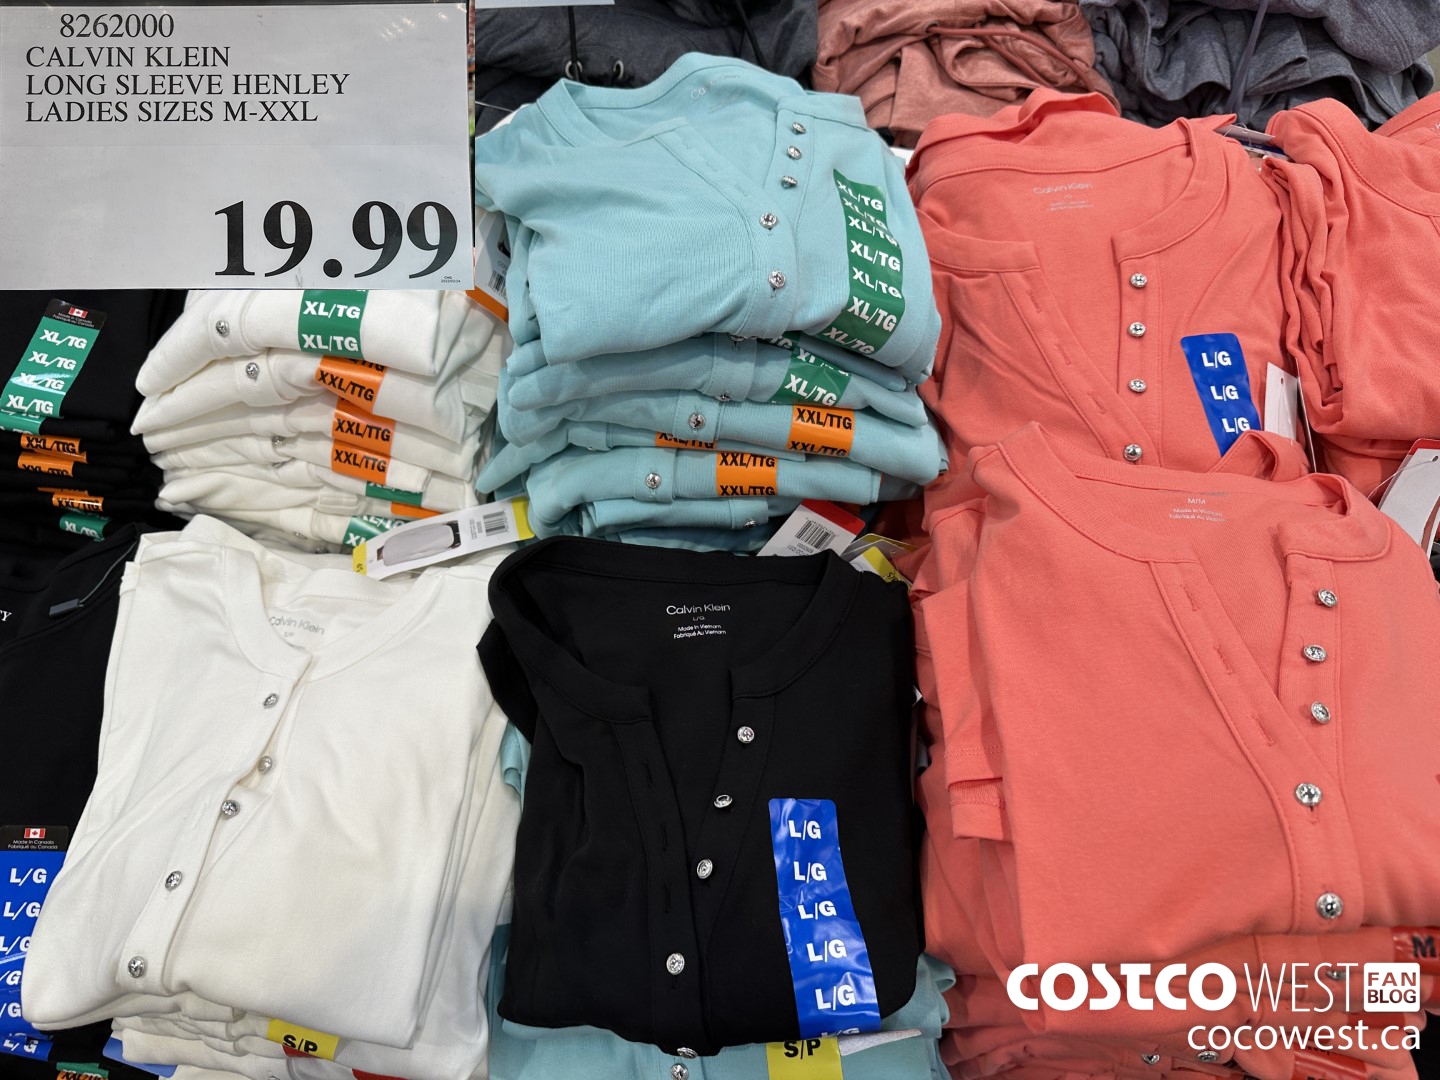 Costco Does It Again - @calvinklein hipster underwear 3 pack $4.97